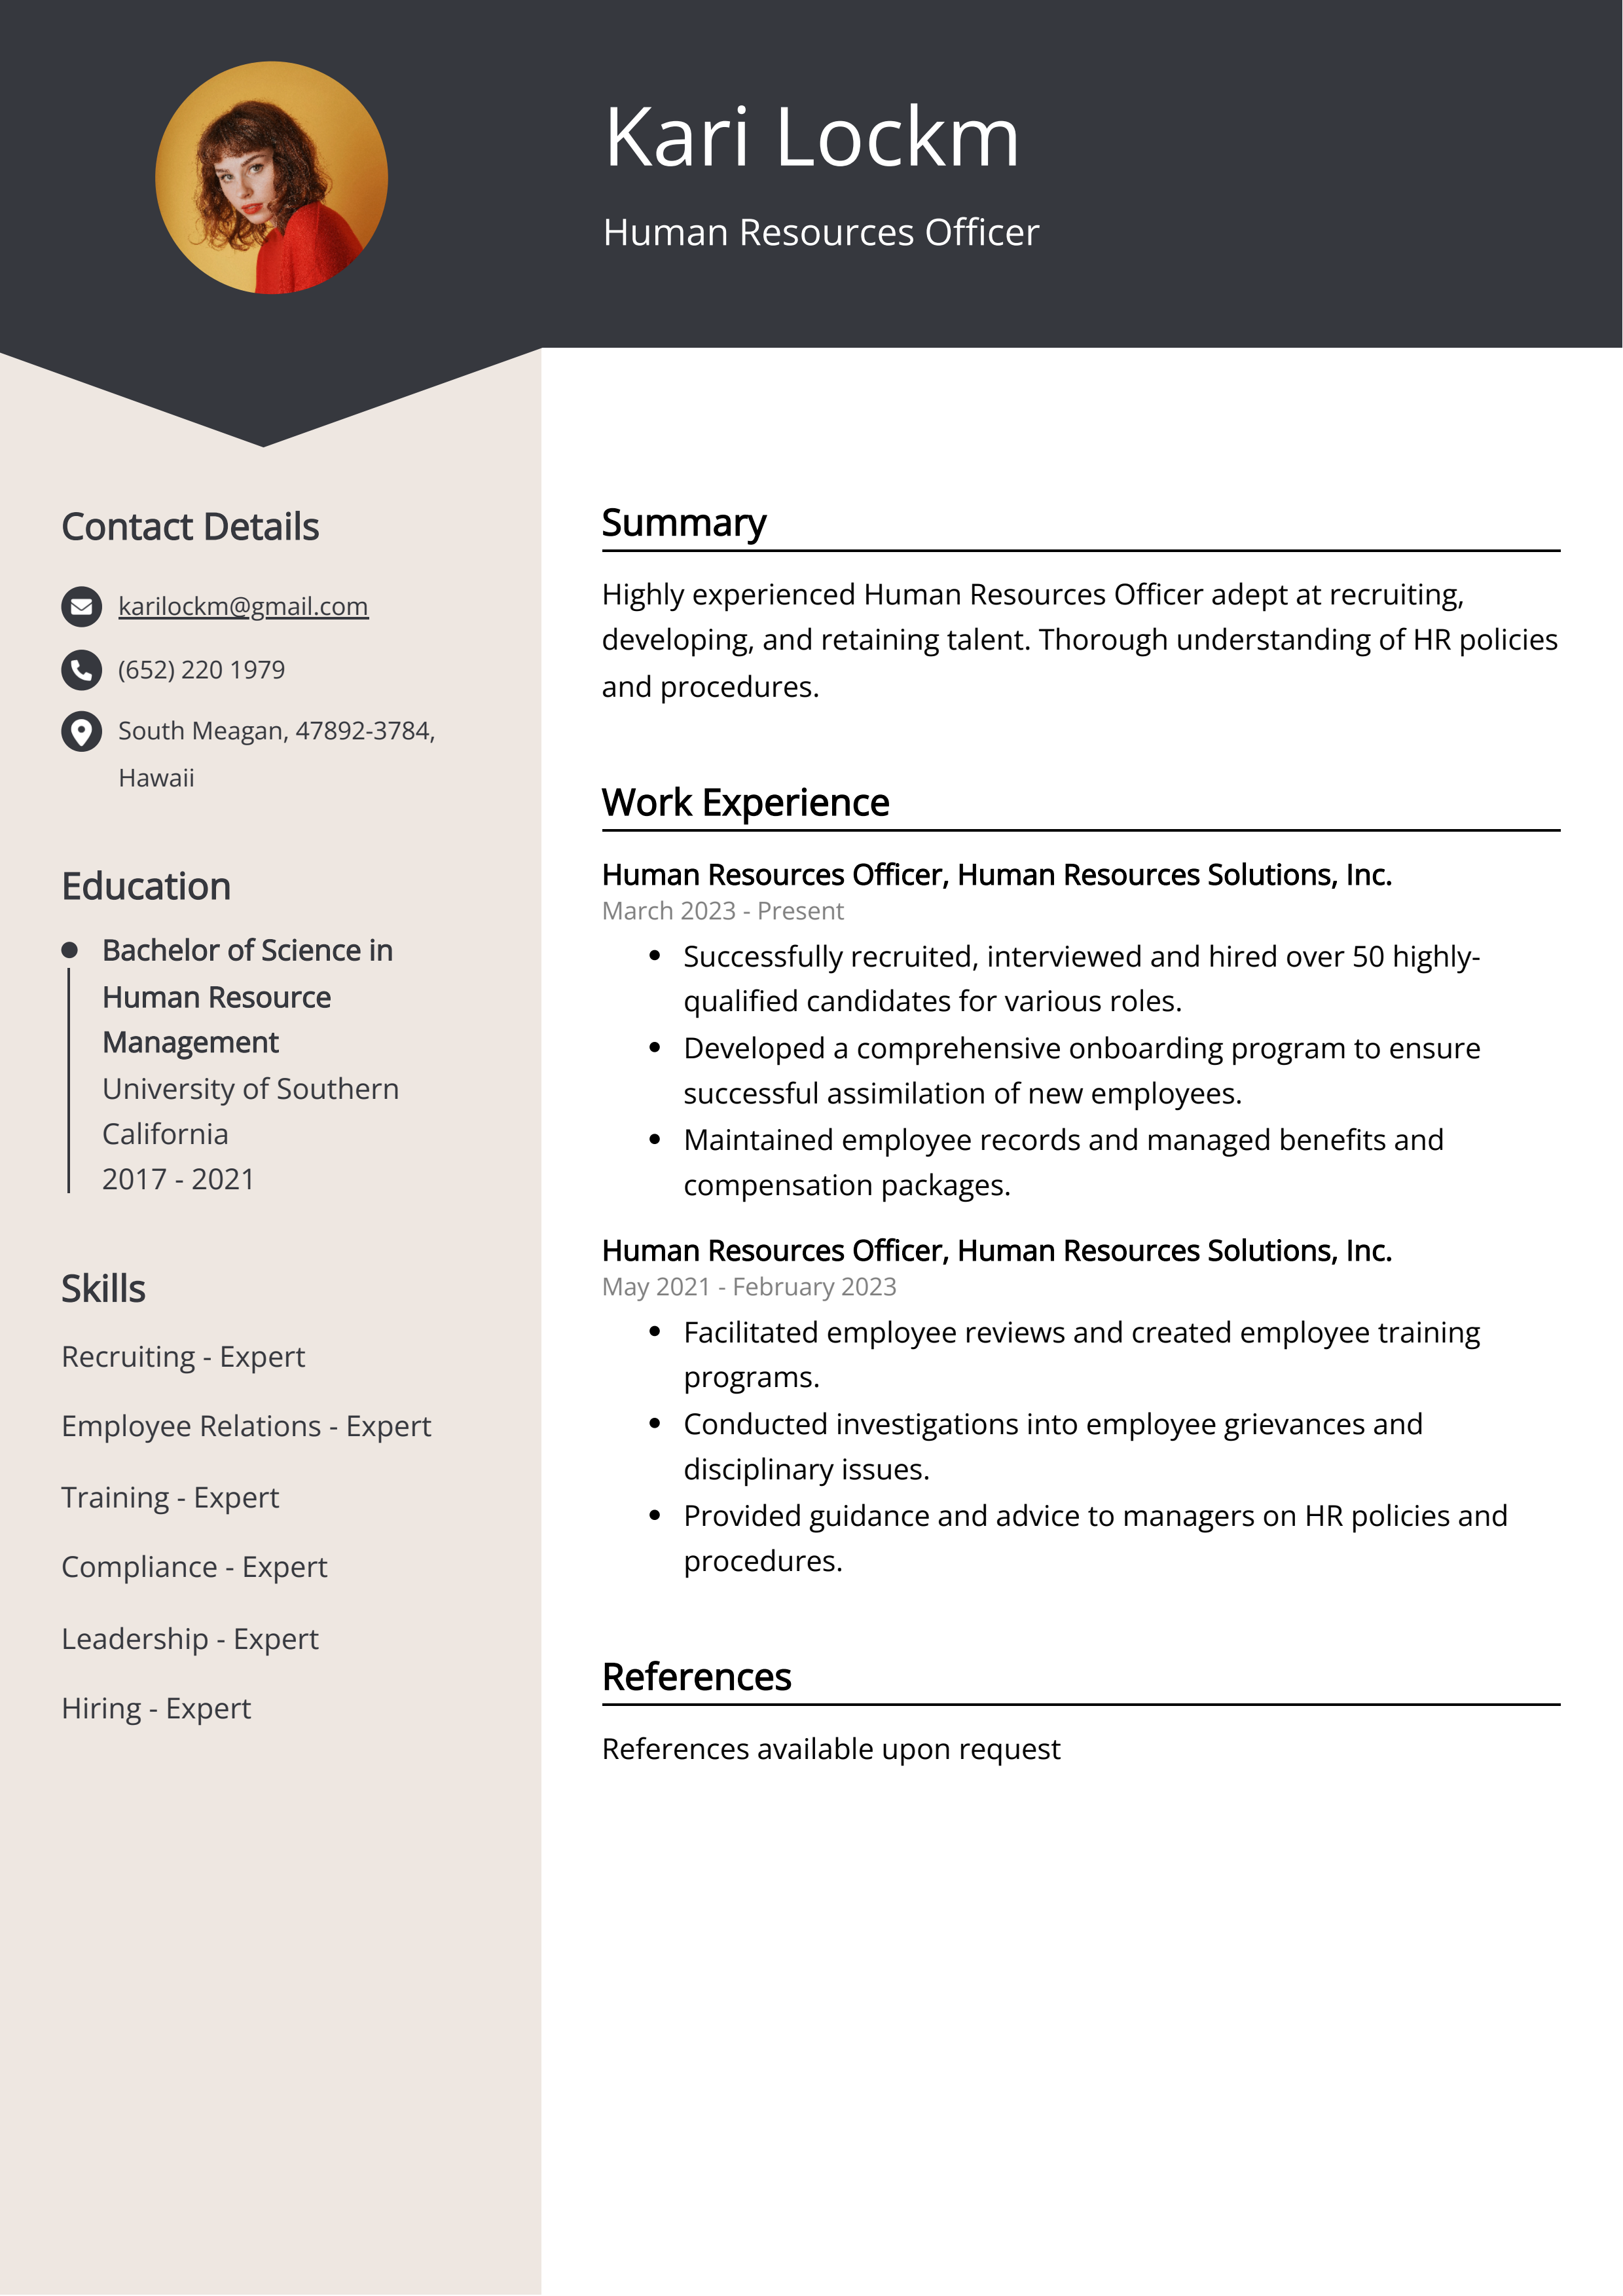 Human Resources Officer CV Example